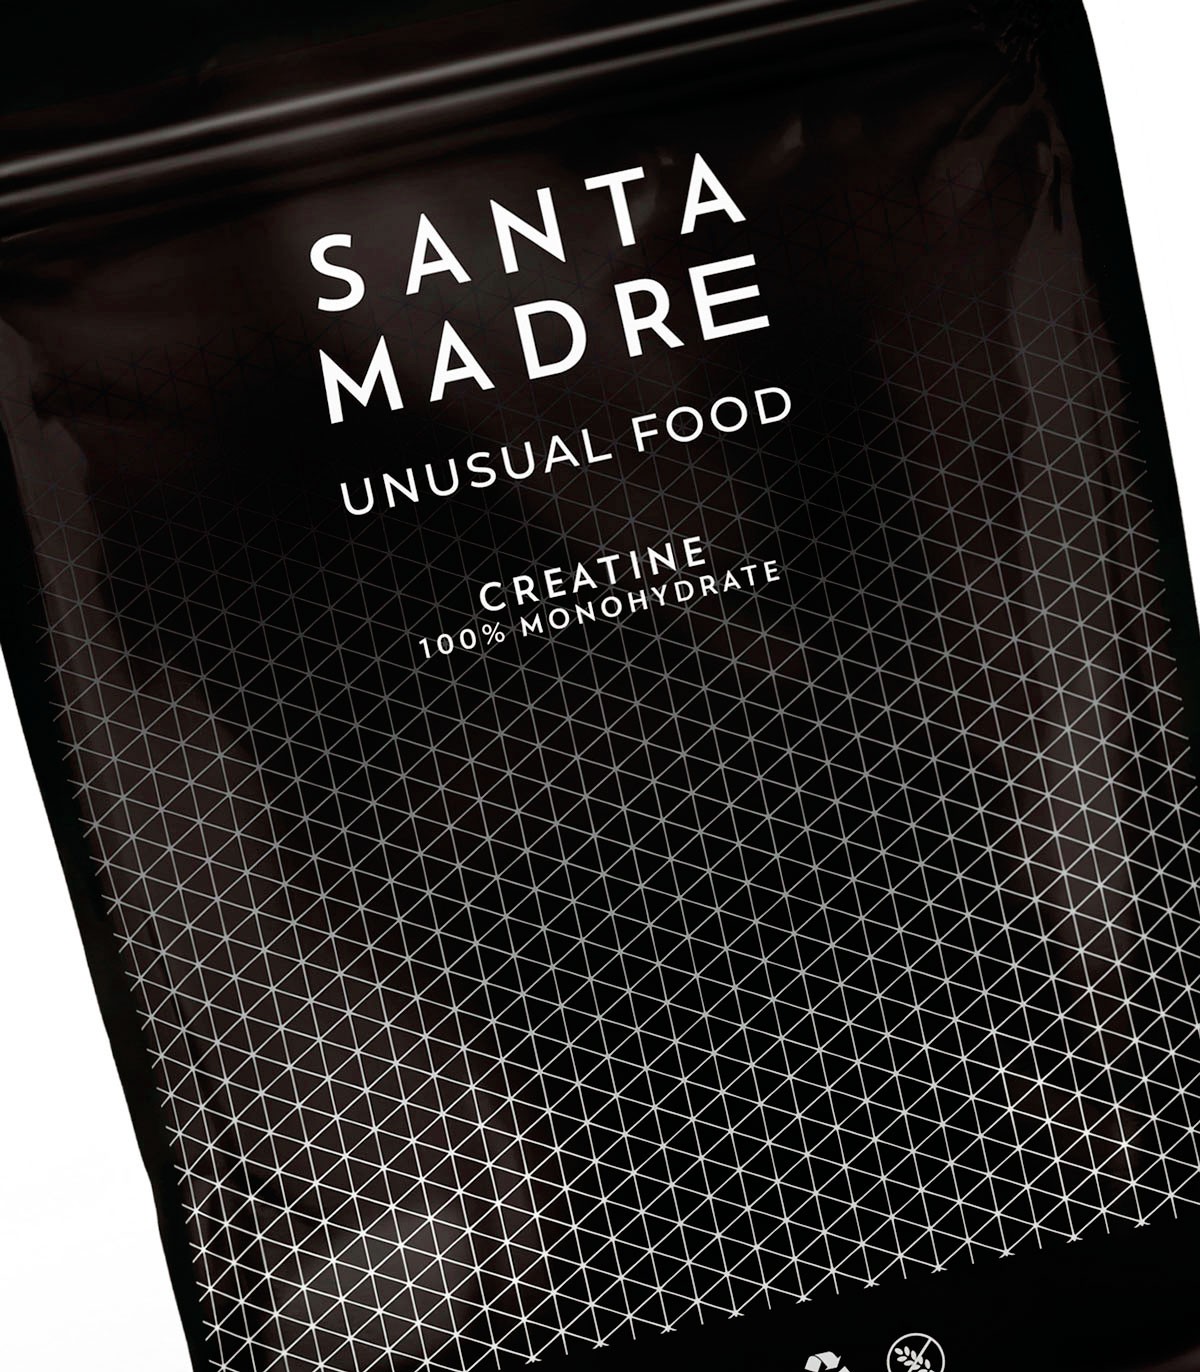 Online sale of SANTA MADRE creatine monohydrate for athletes at a discounted price